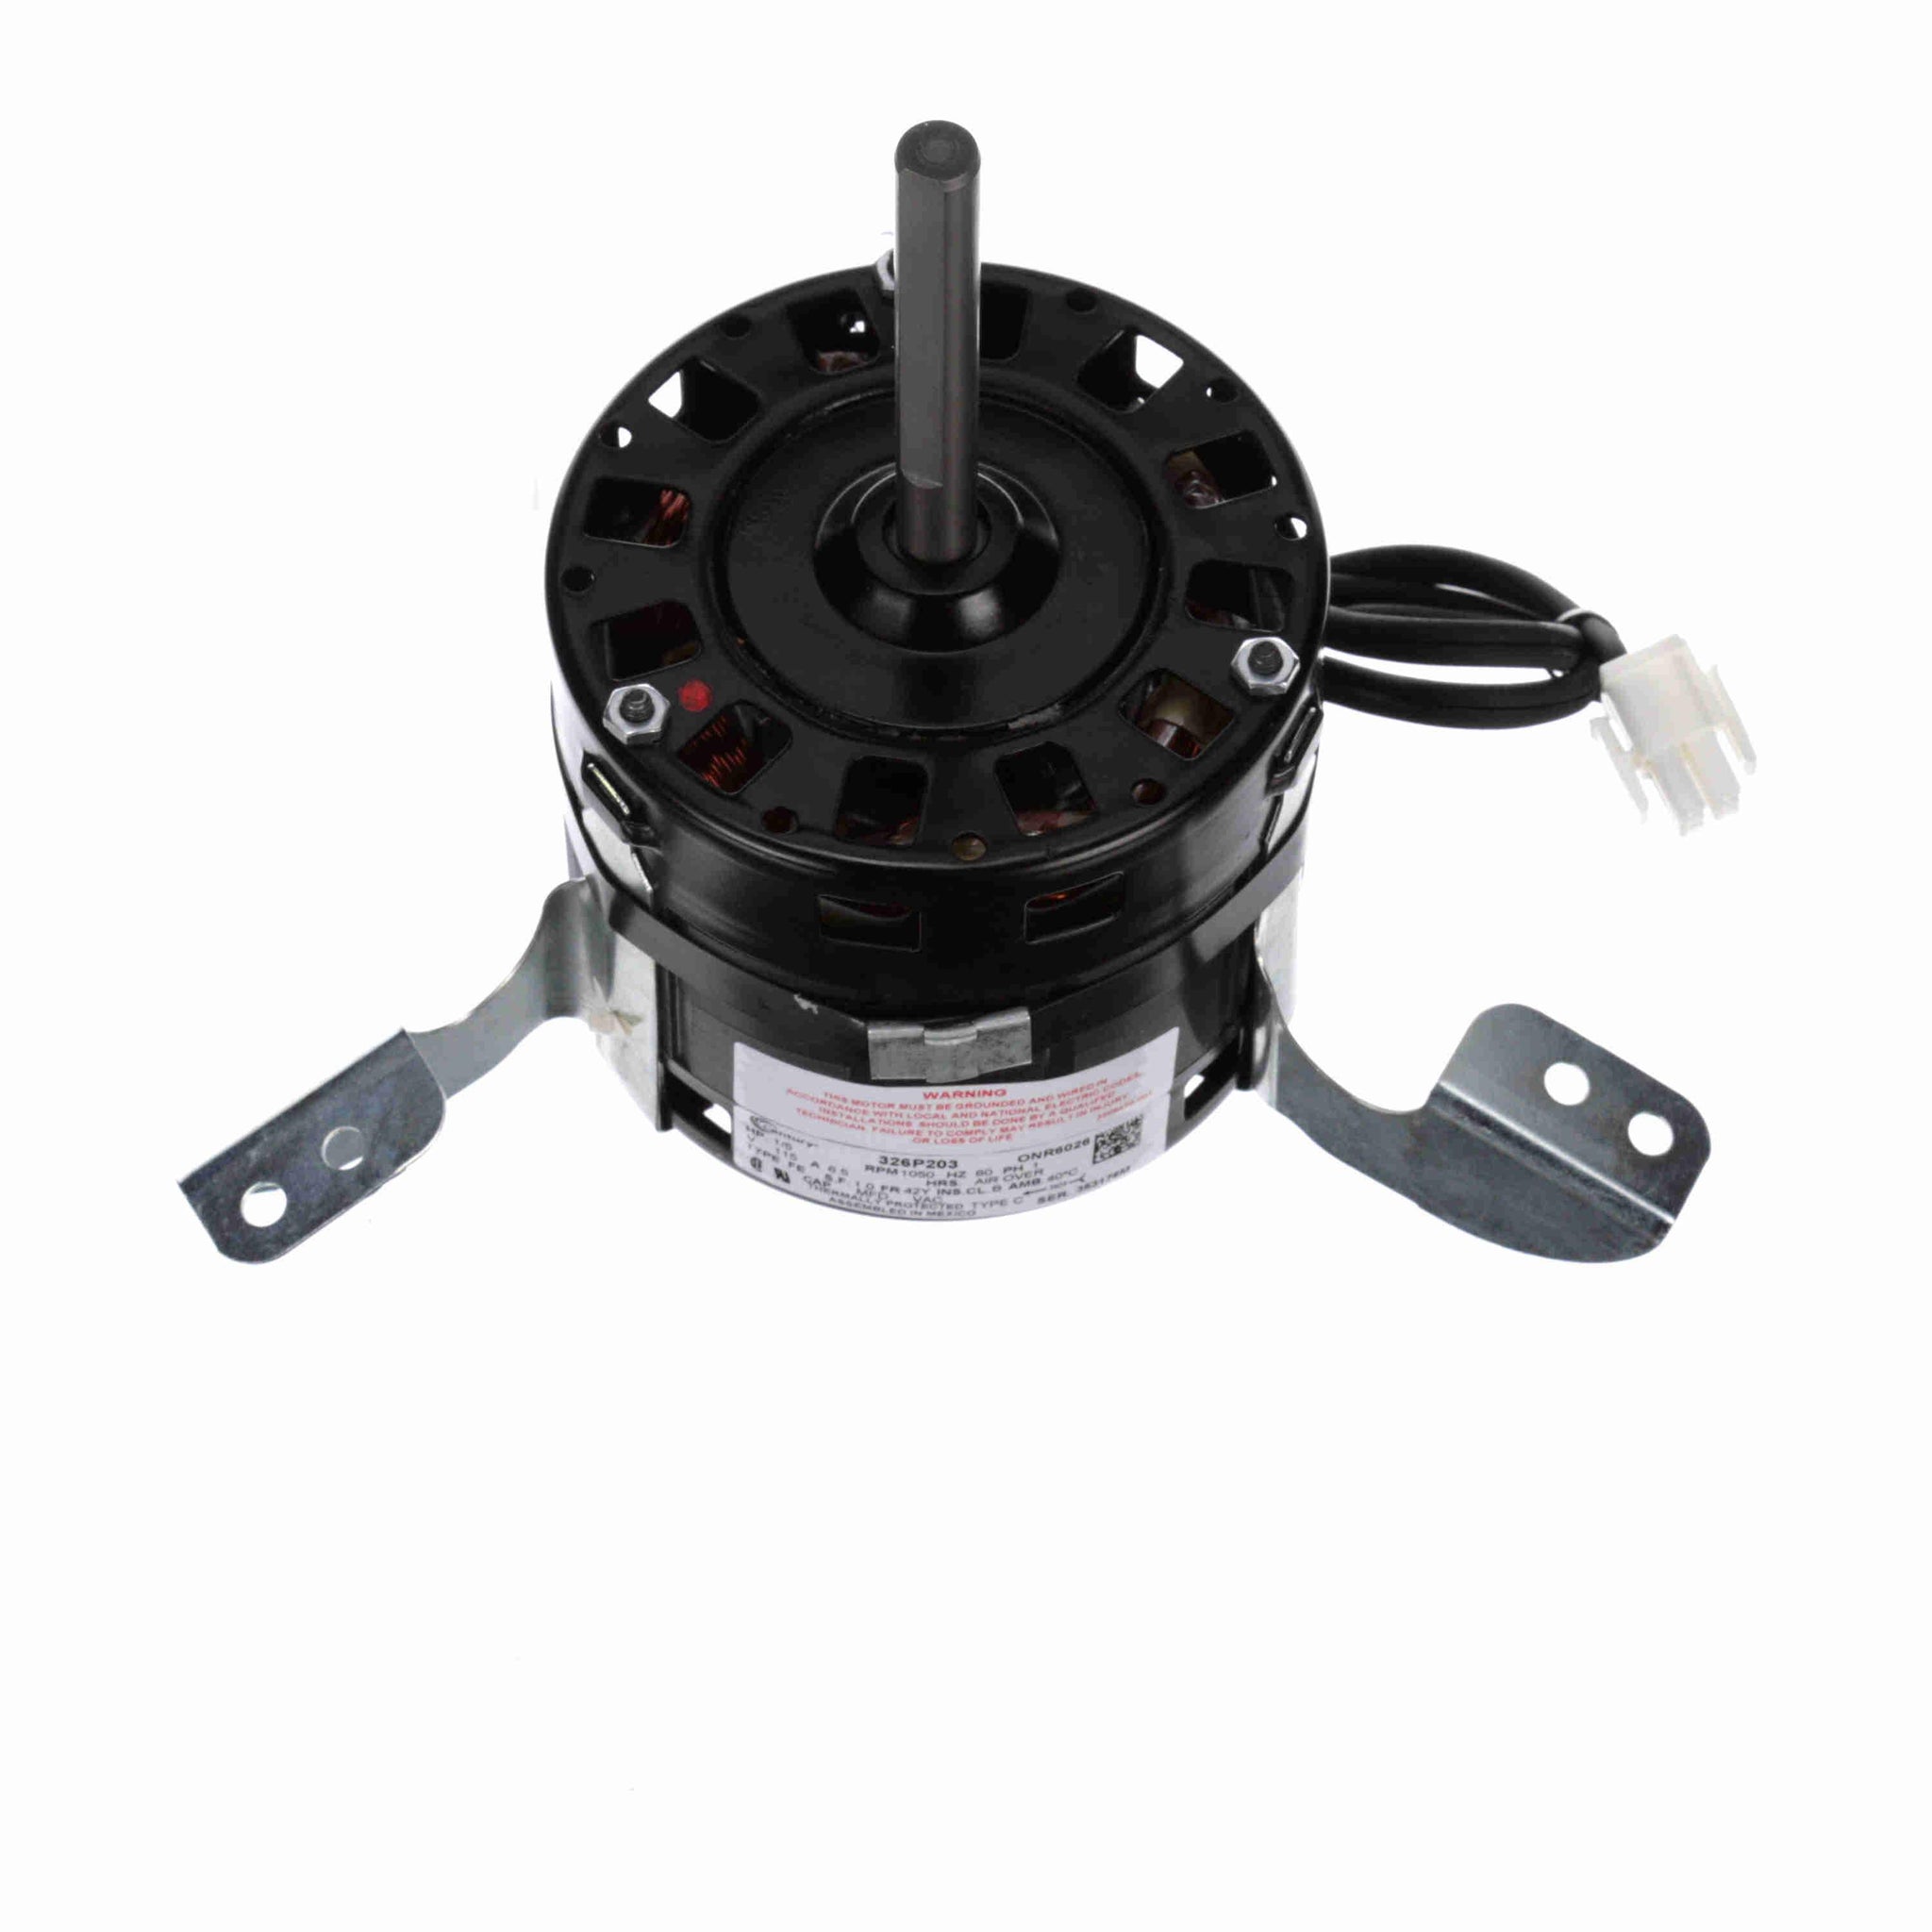 ONR6026 - 1/5 HP OEM Replacement Motor, 1050 RPM, 115 Volts, 42 Frame, OAO - Hardware & Moreee